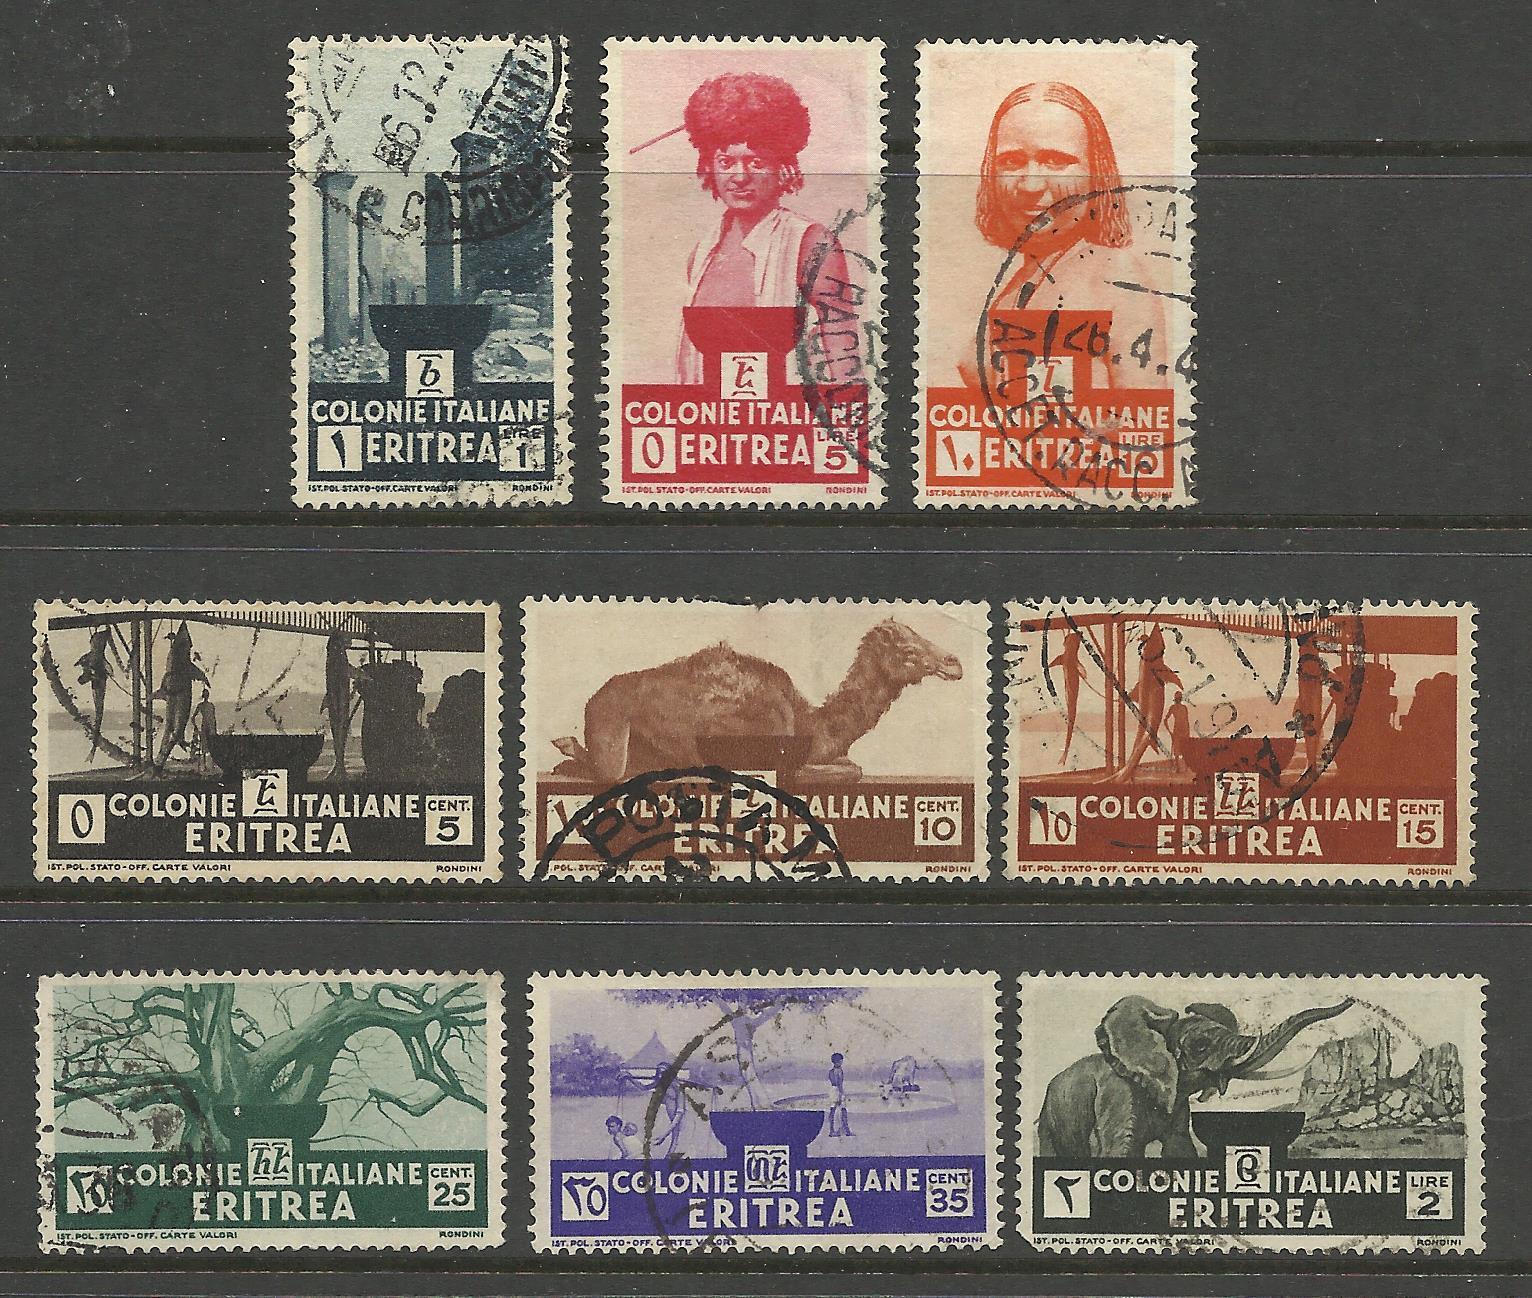 ITALY OCCUPATION OF ERITREA 1933 PART SET USED